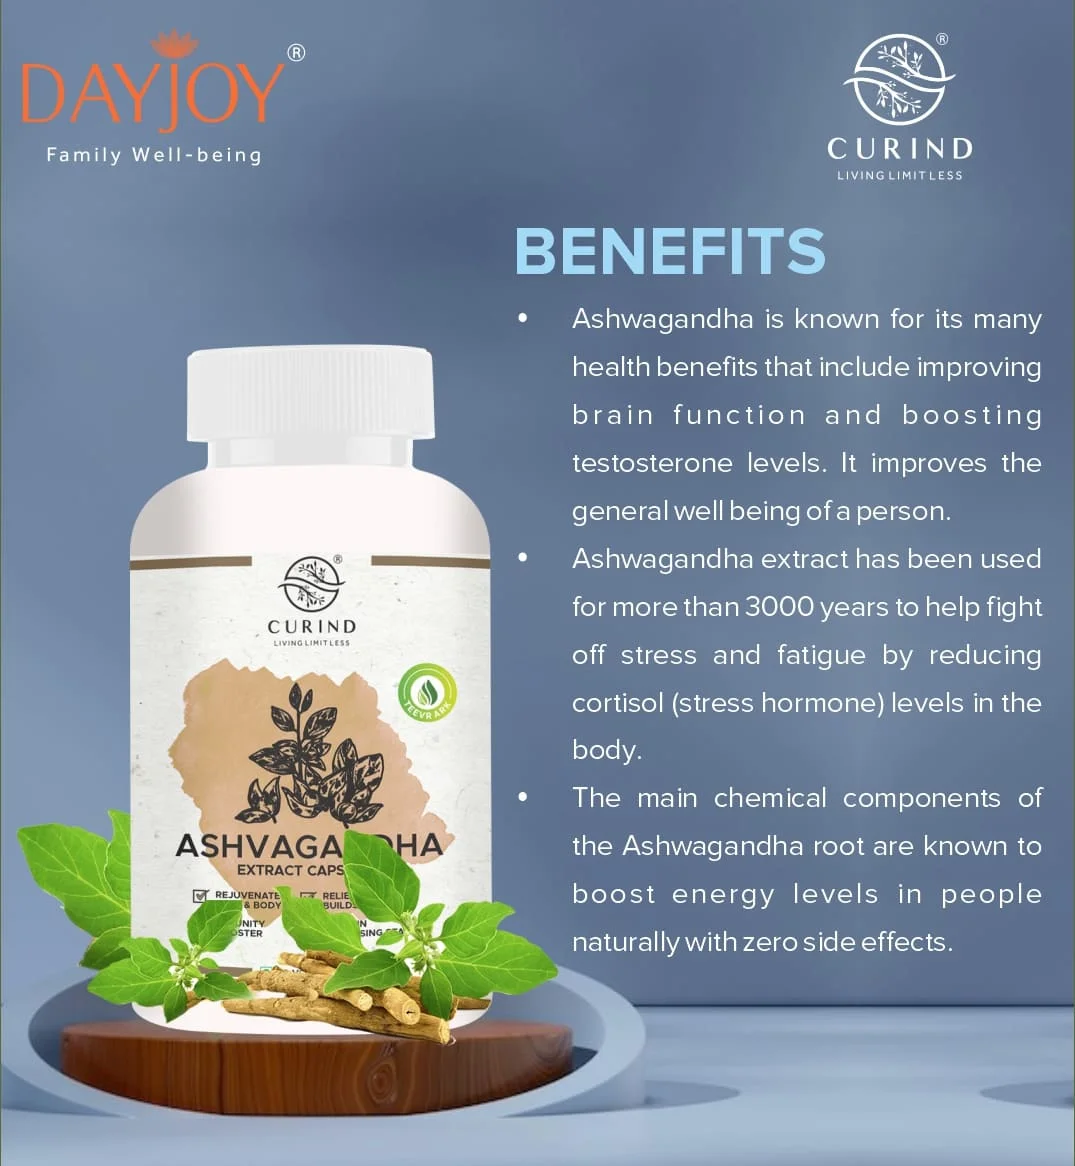 Ashvagandha Extract- ayurvedic capsules to improve general well-being